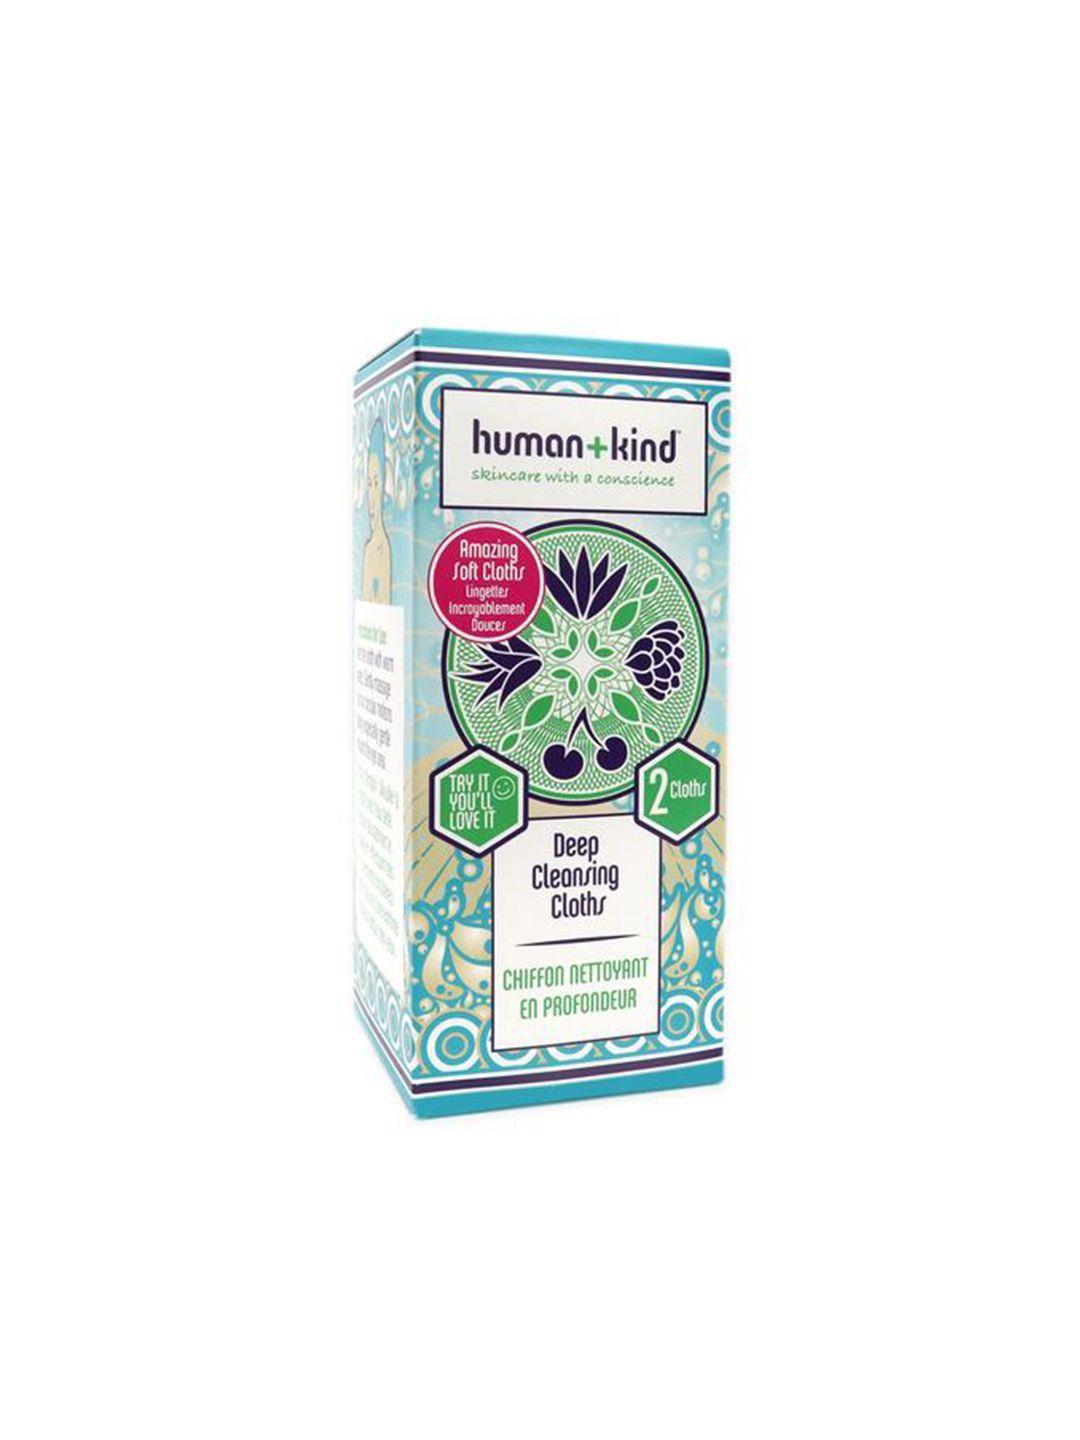 humankind deep cleansing makeup remover cloth